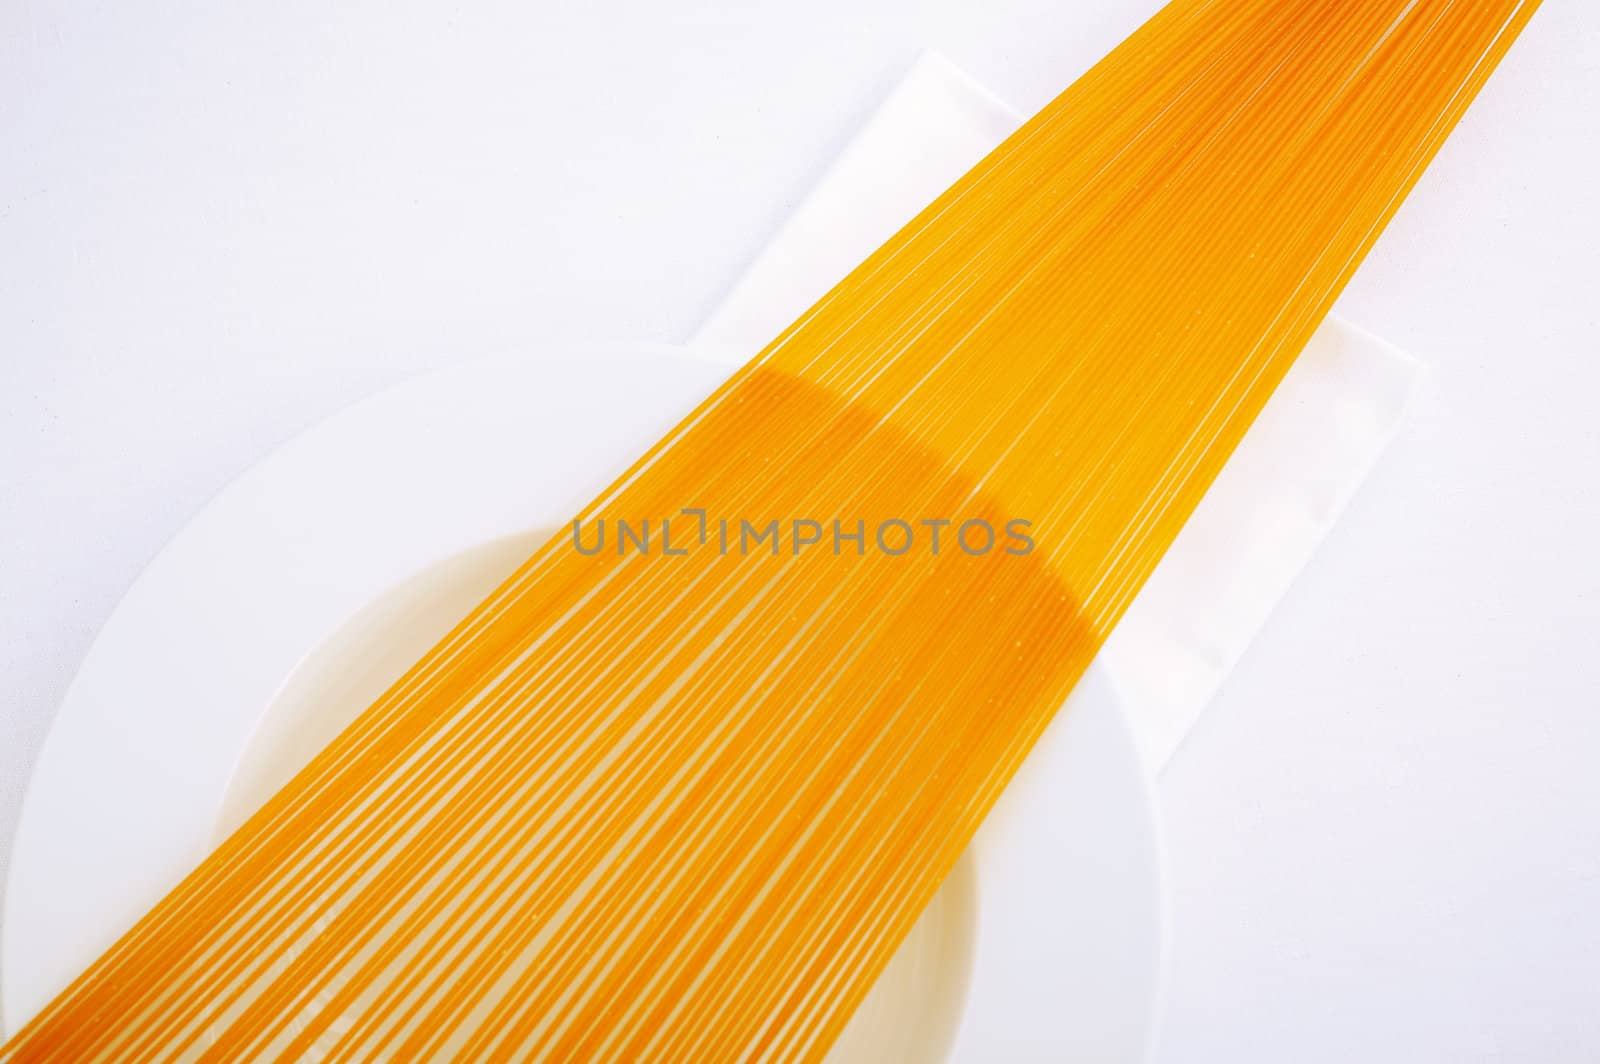 Abstract red (tomato) pasta setup on the plate